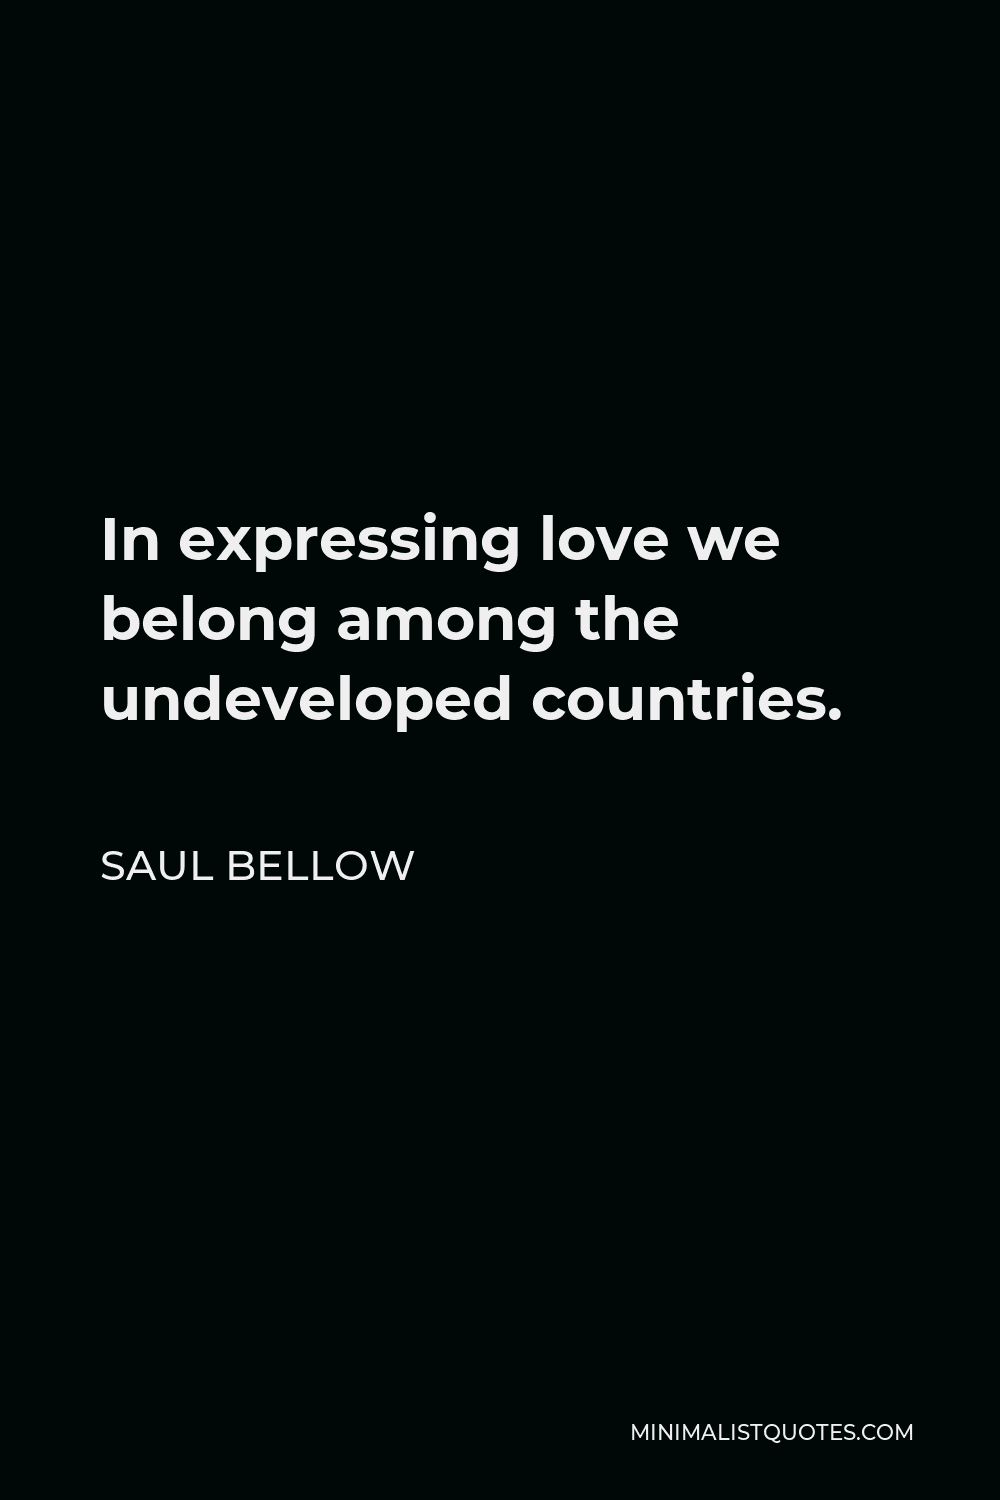 Saul Bellow Quote - In expressing love we belong among the undeveloped countries.